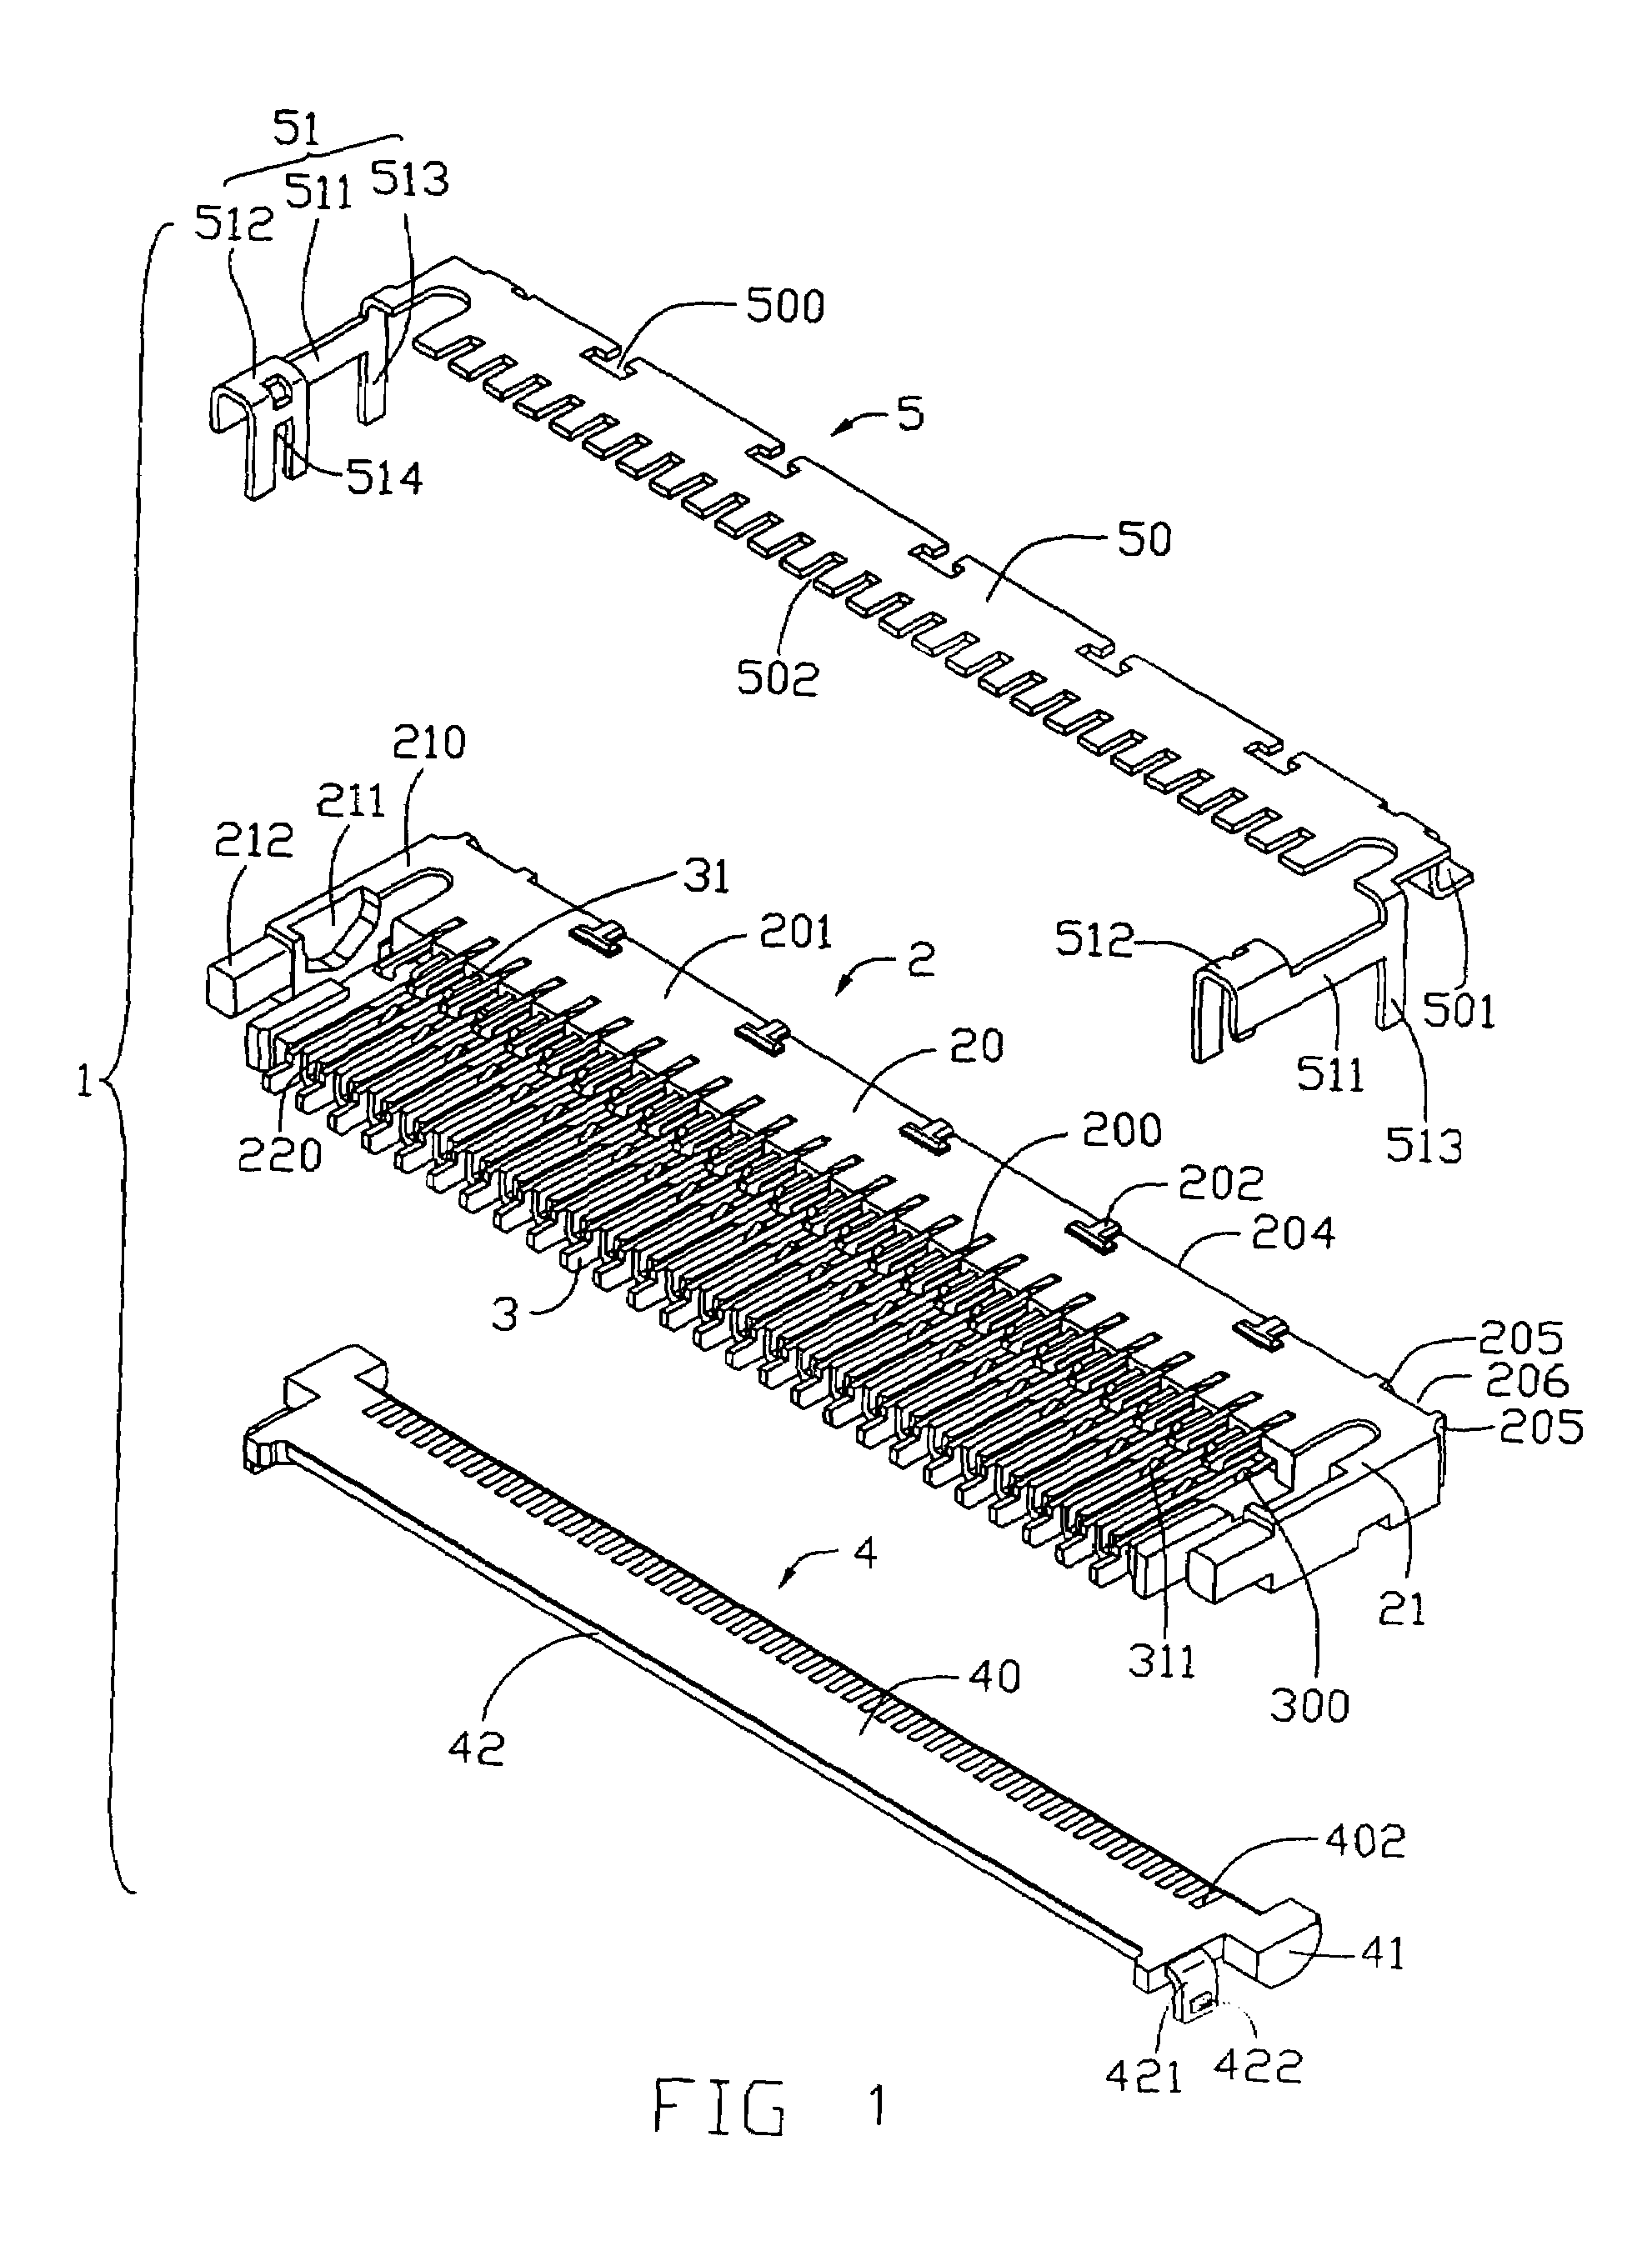 Electrical connector for use with flexible printed circuit